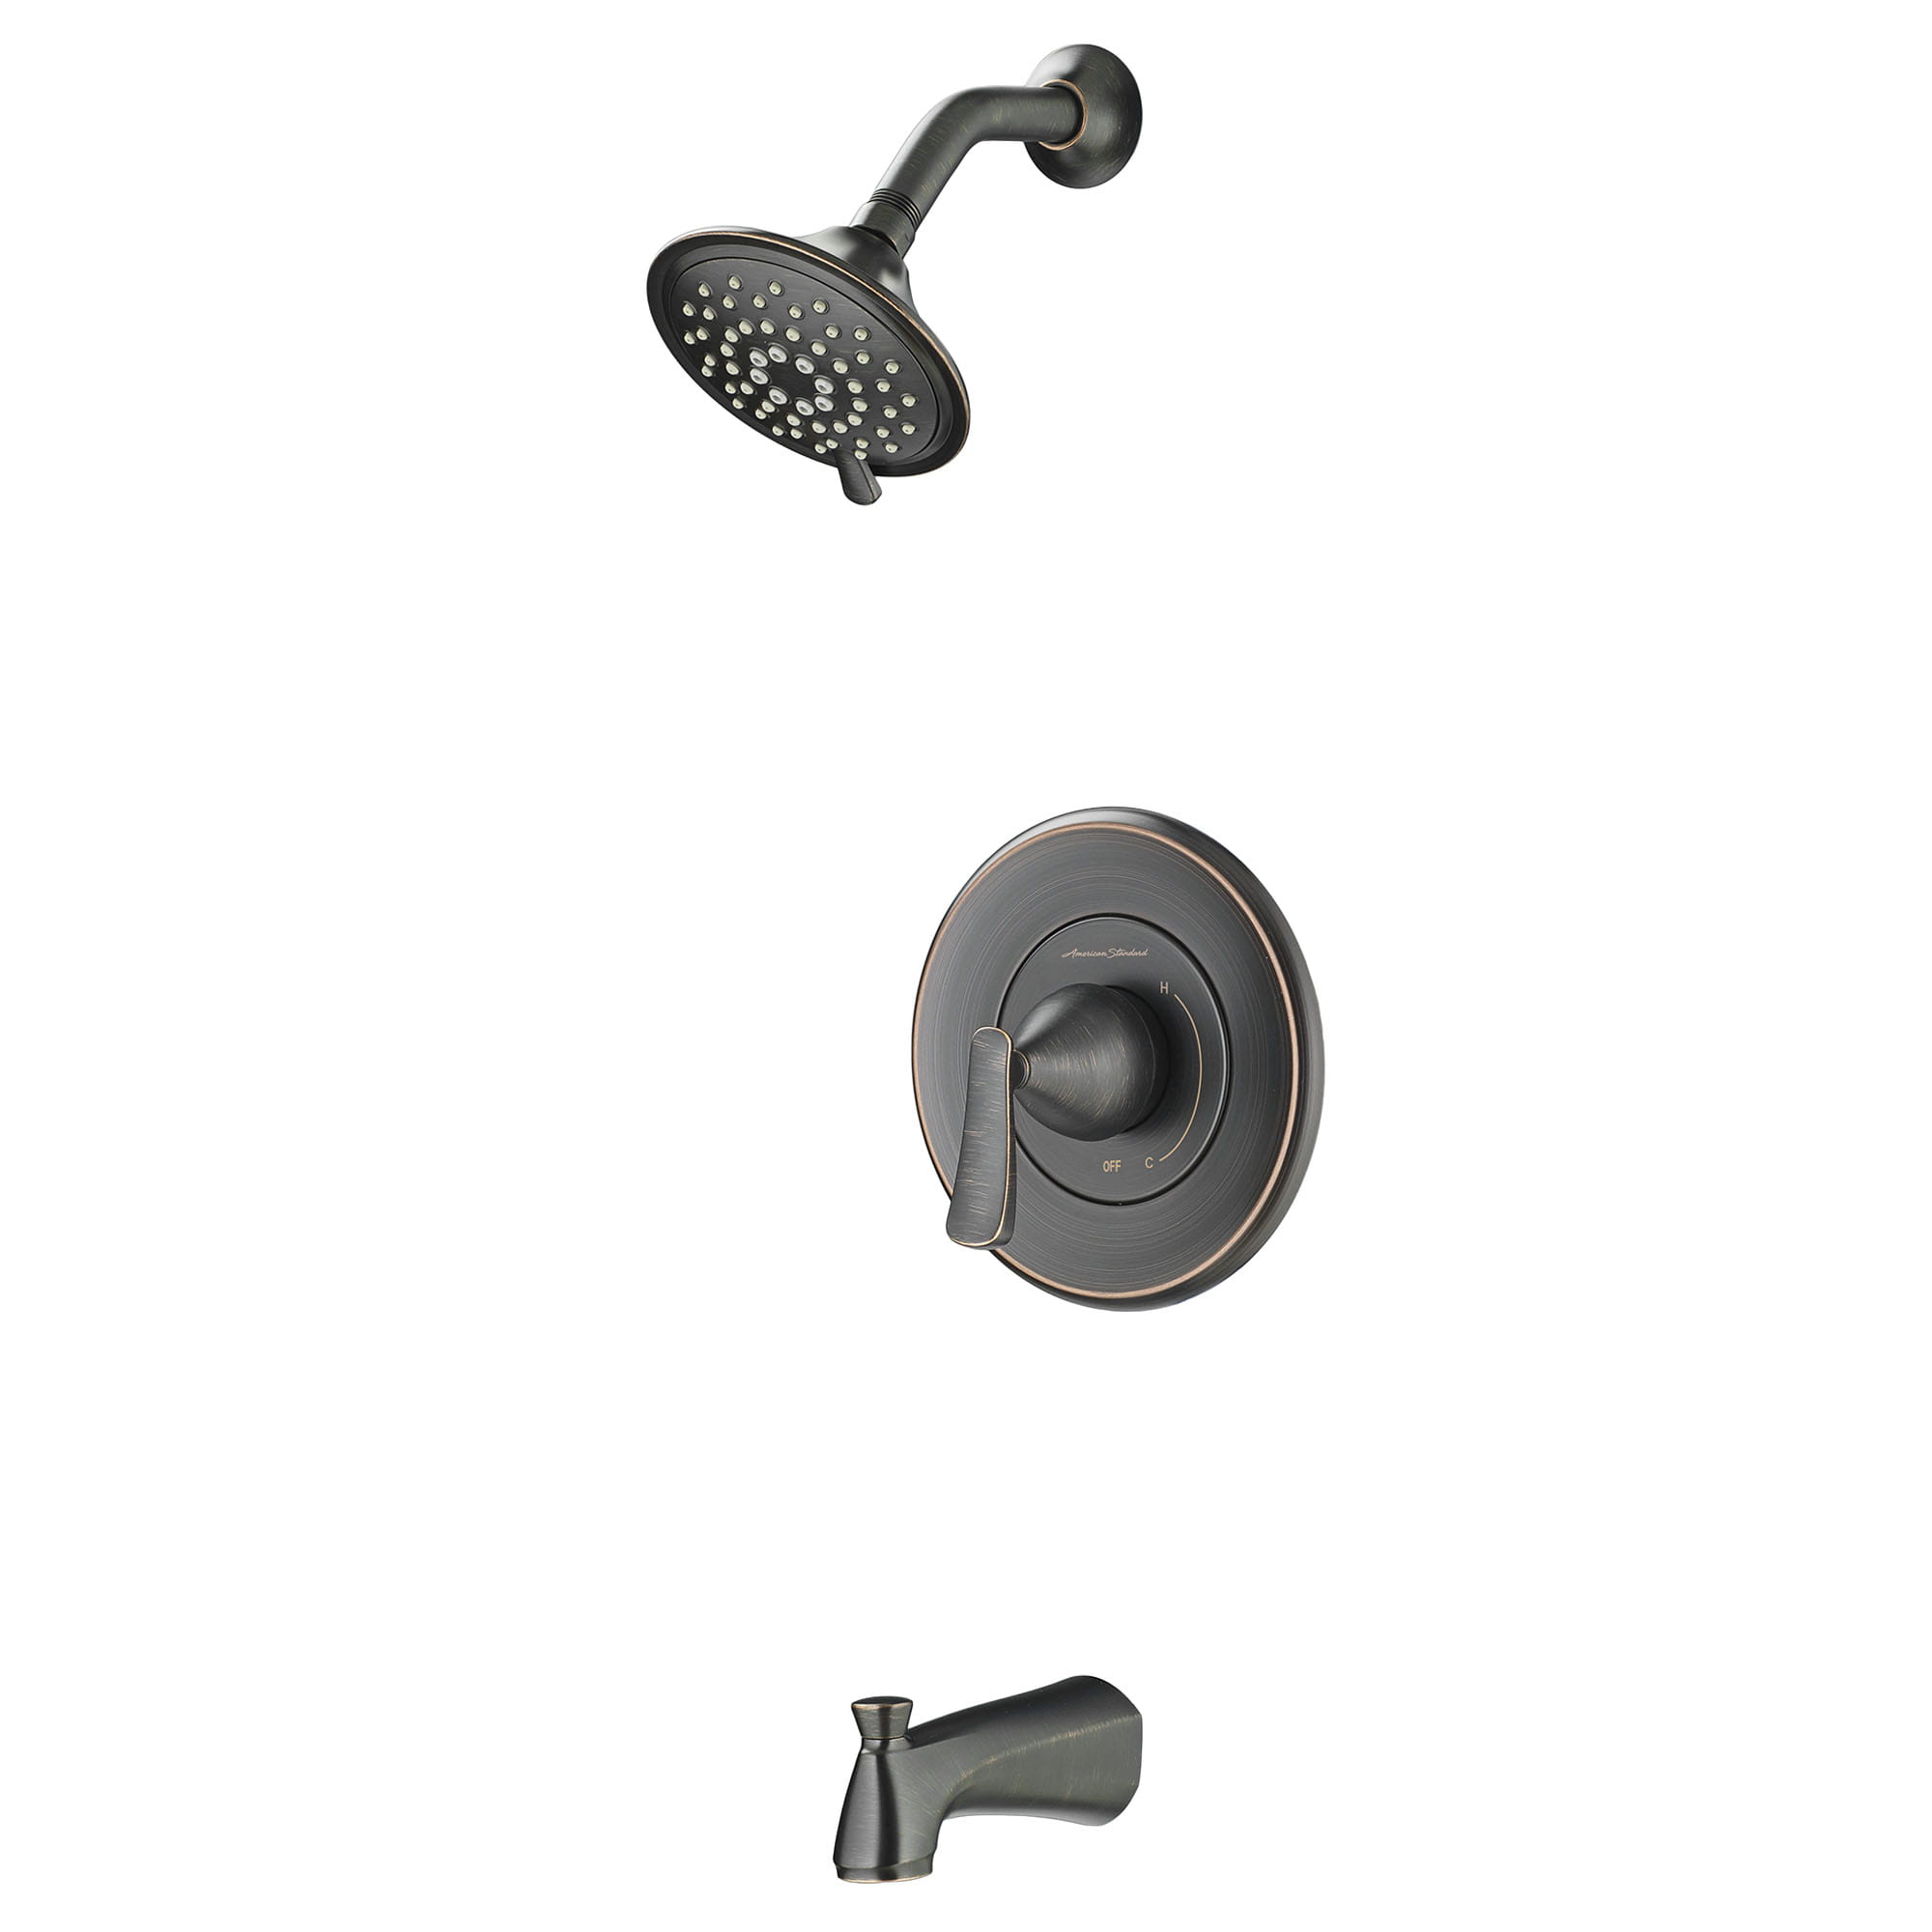 Chatfield 20 GPM Tub and Shower Trim Kit with 3 Function Showerhead Ceramic Disc Valve Cartridge with Lever Handle LEGACY BRONZE